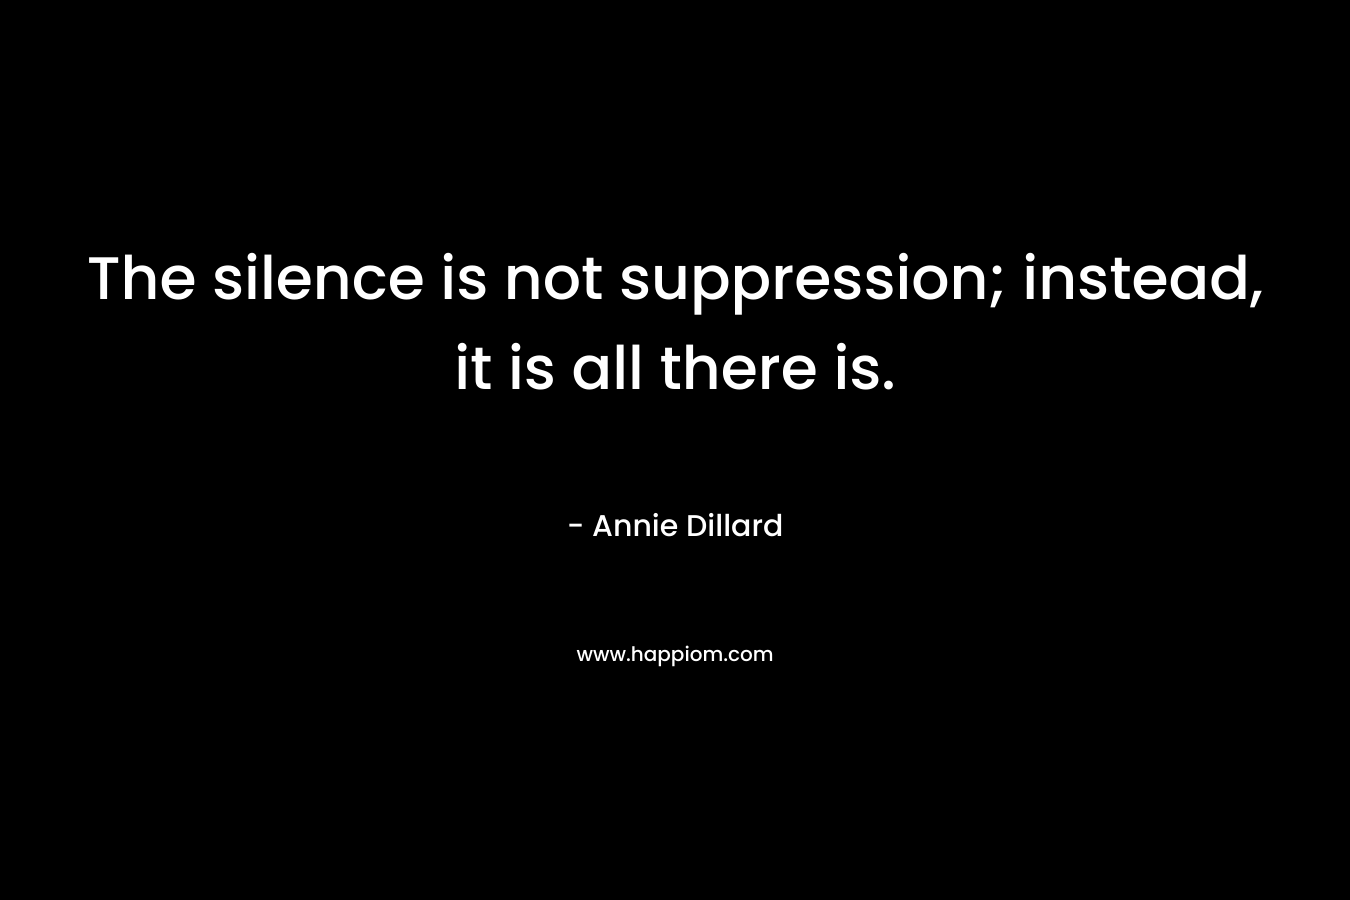 The silence is not suppression; instead, it is all there is.